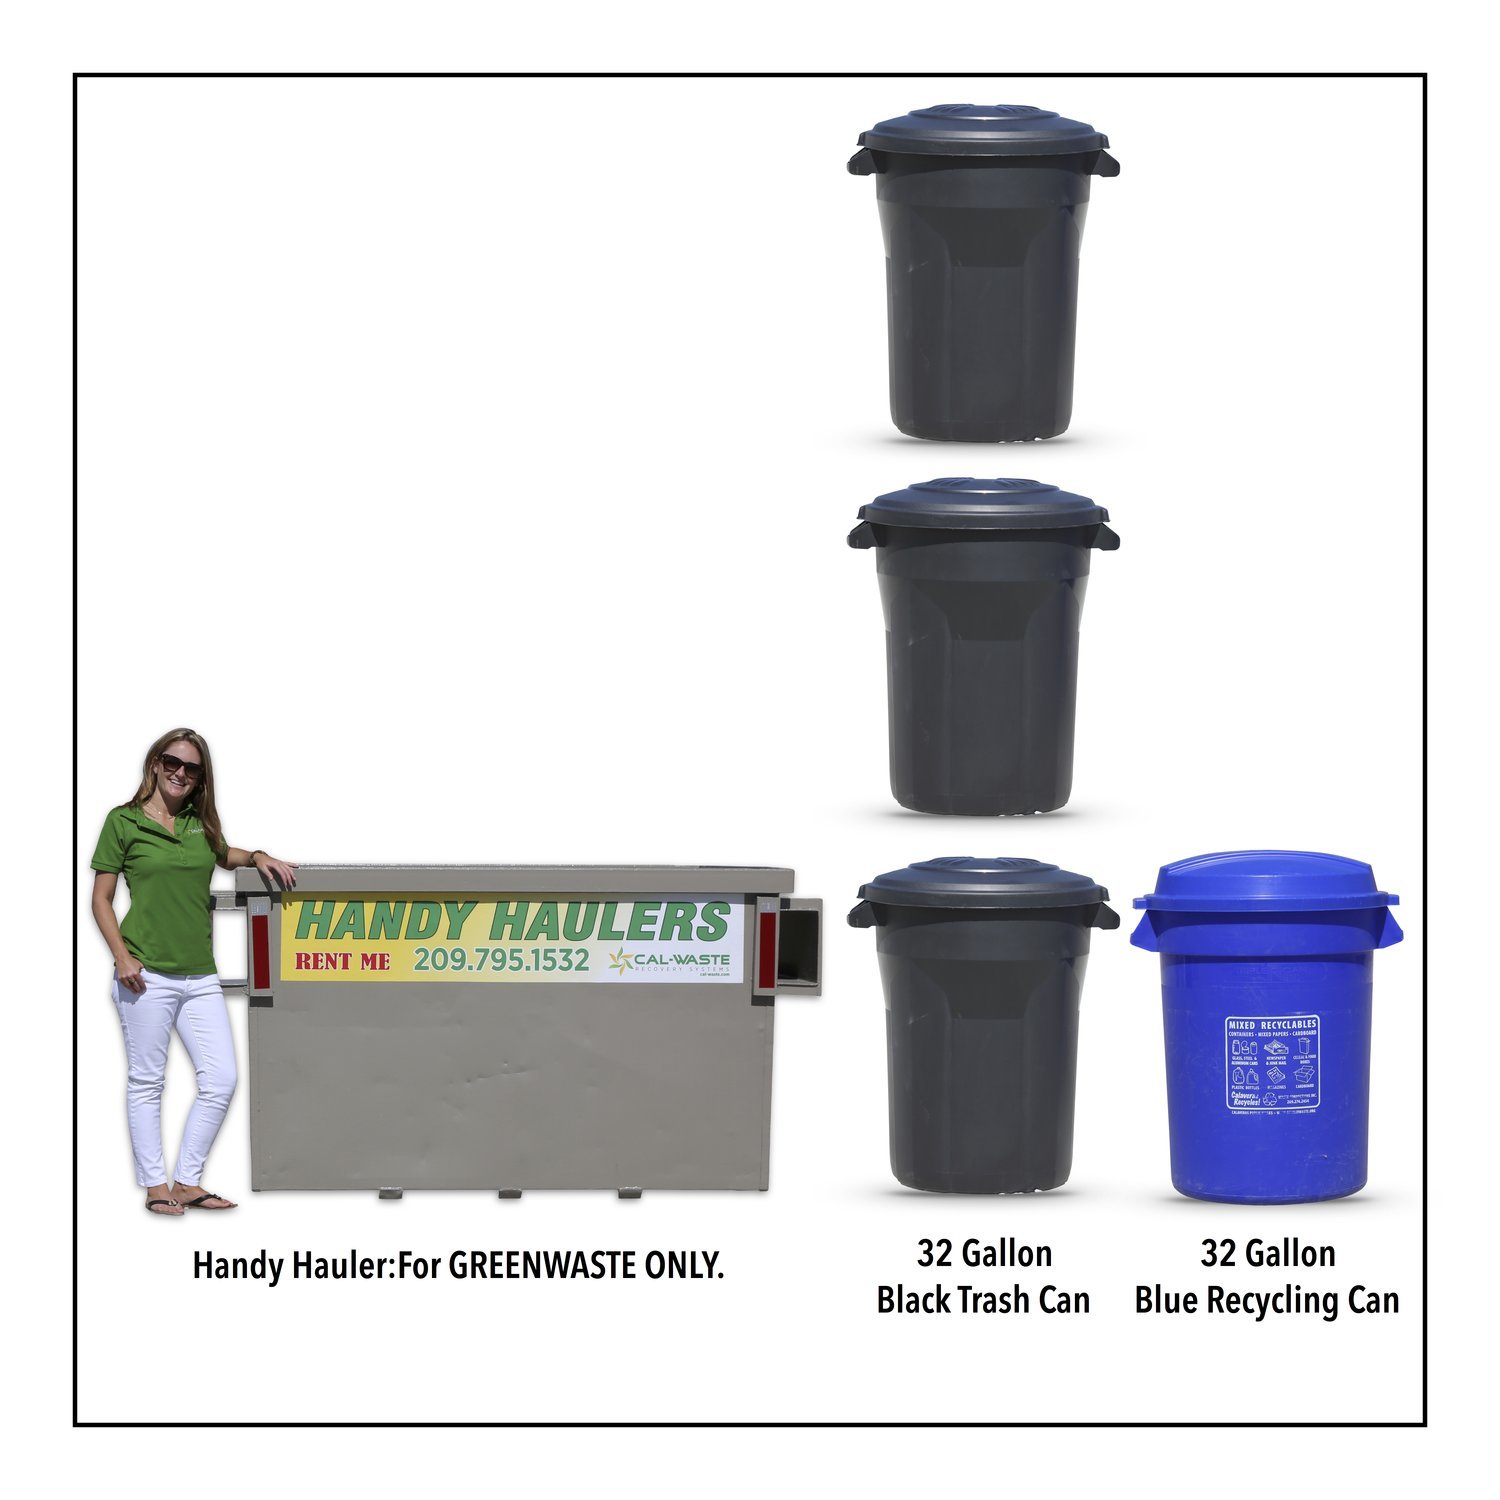 Cal-Waste CAN Service - Three 32 Gallon Trash & Recycling, Yearly Yard & Garden Handy Hauler - 3 MONTHS FREE